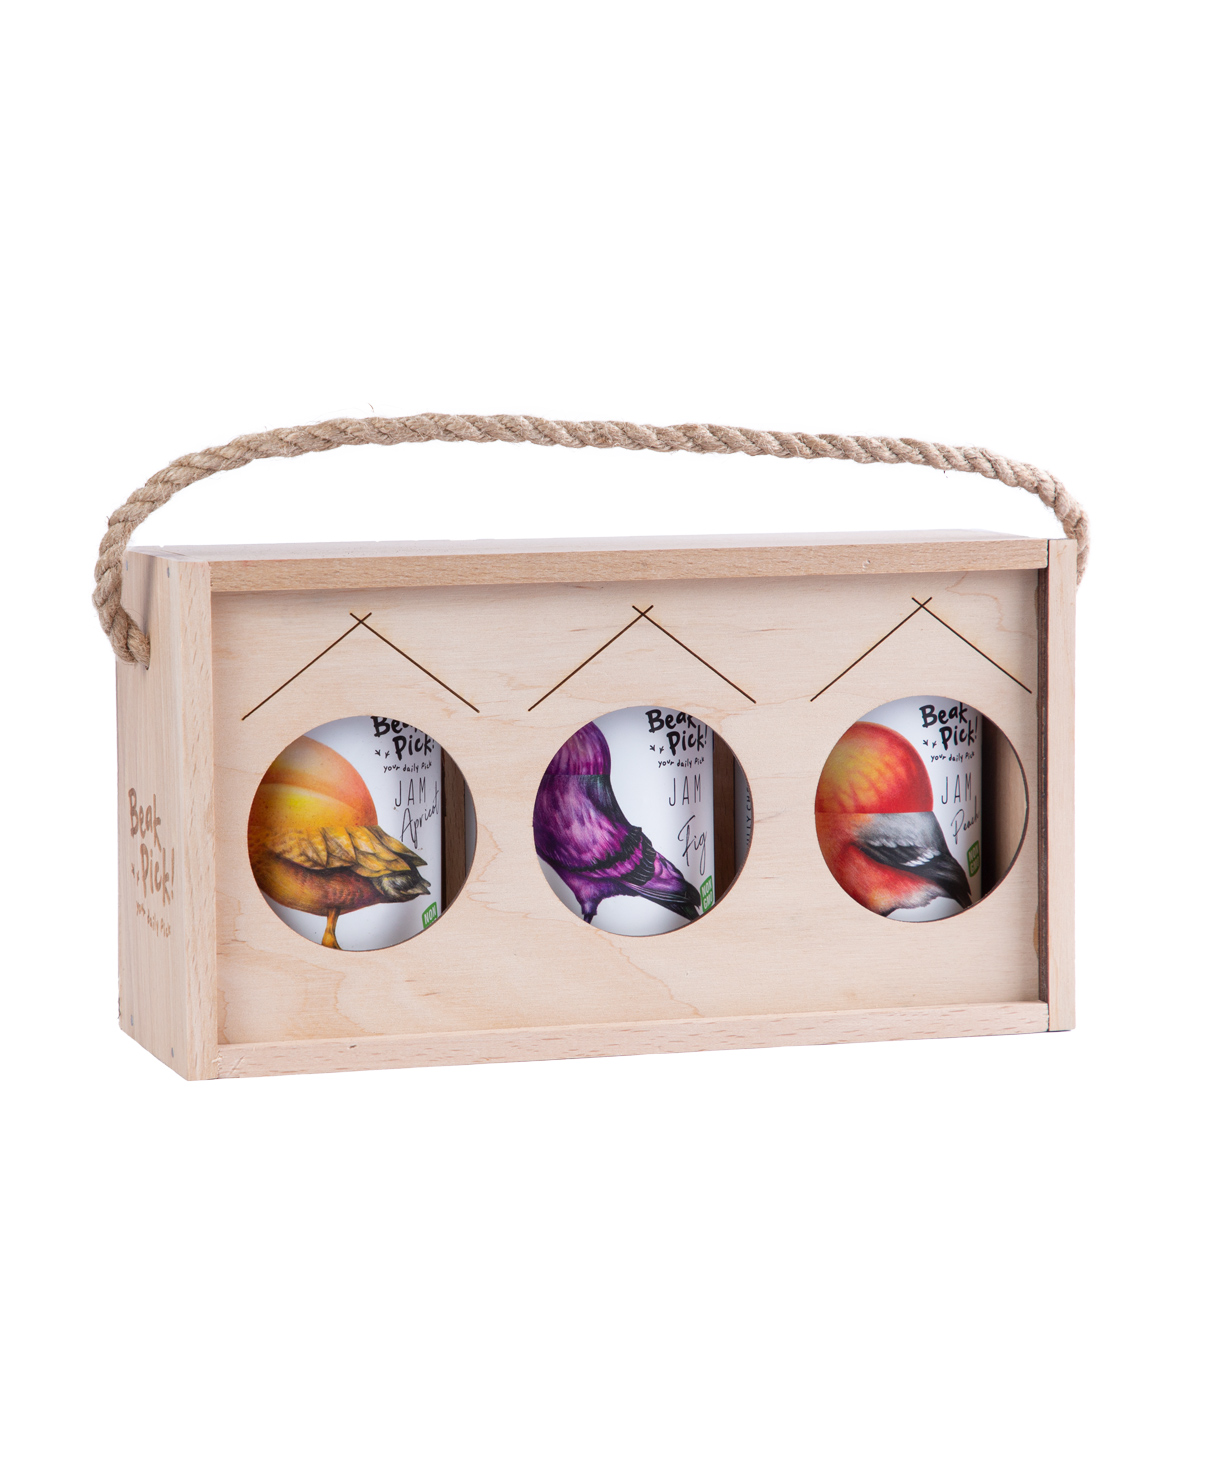 Collection `Beak Pick!` in a wooden box